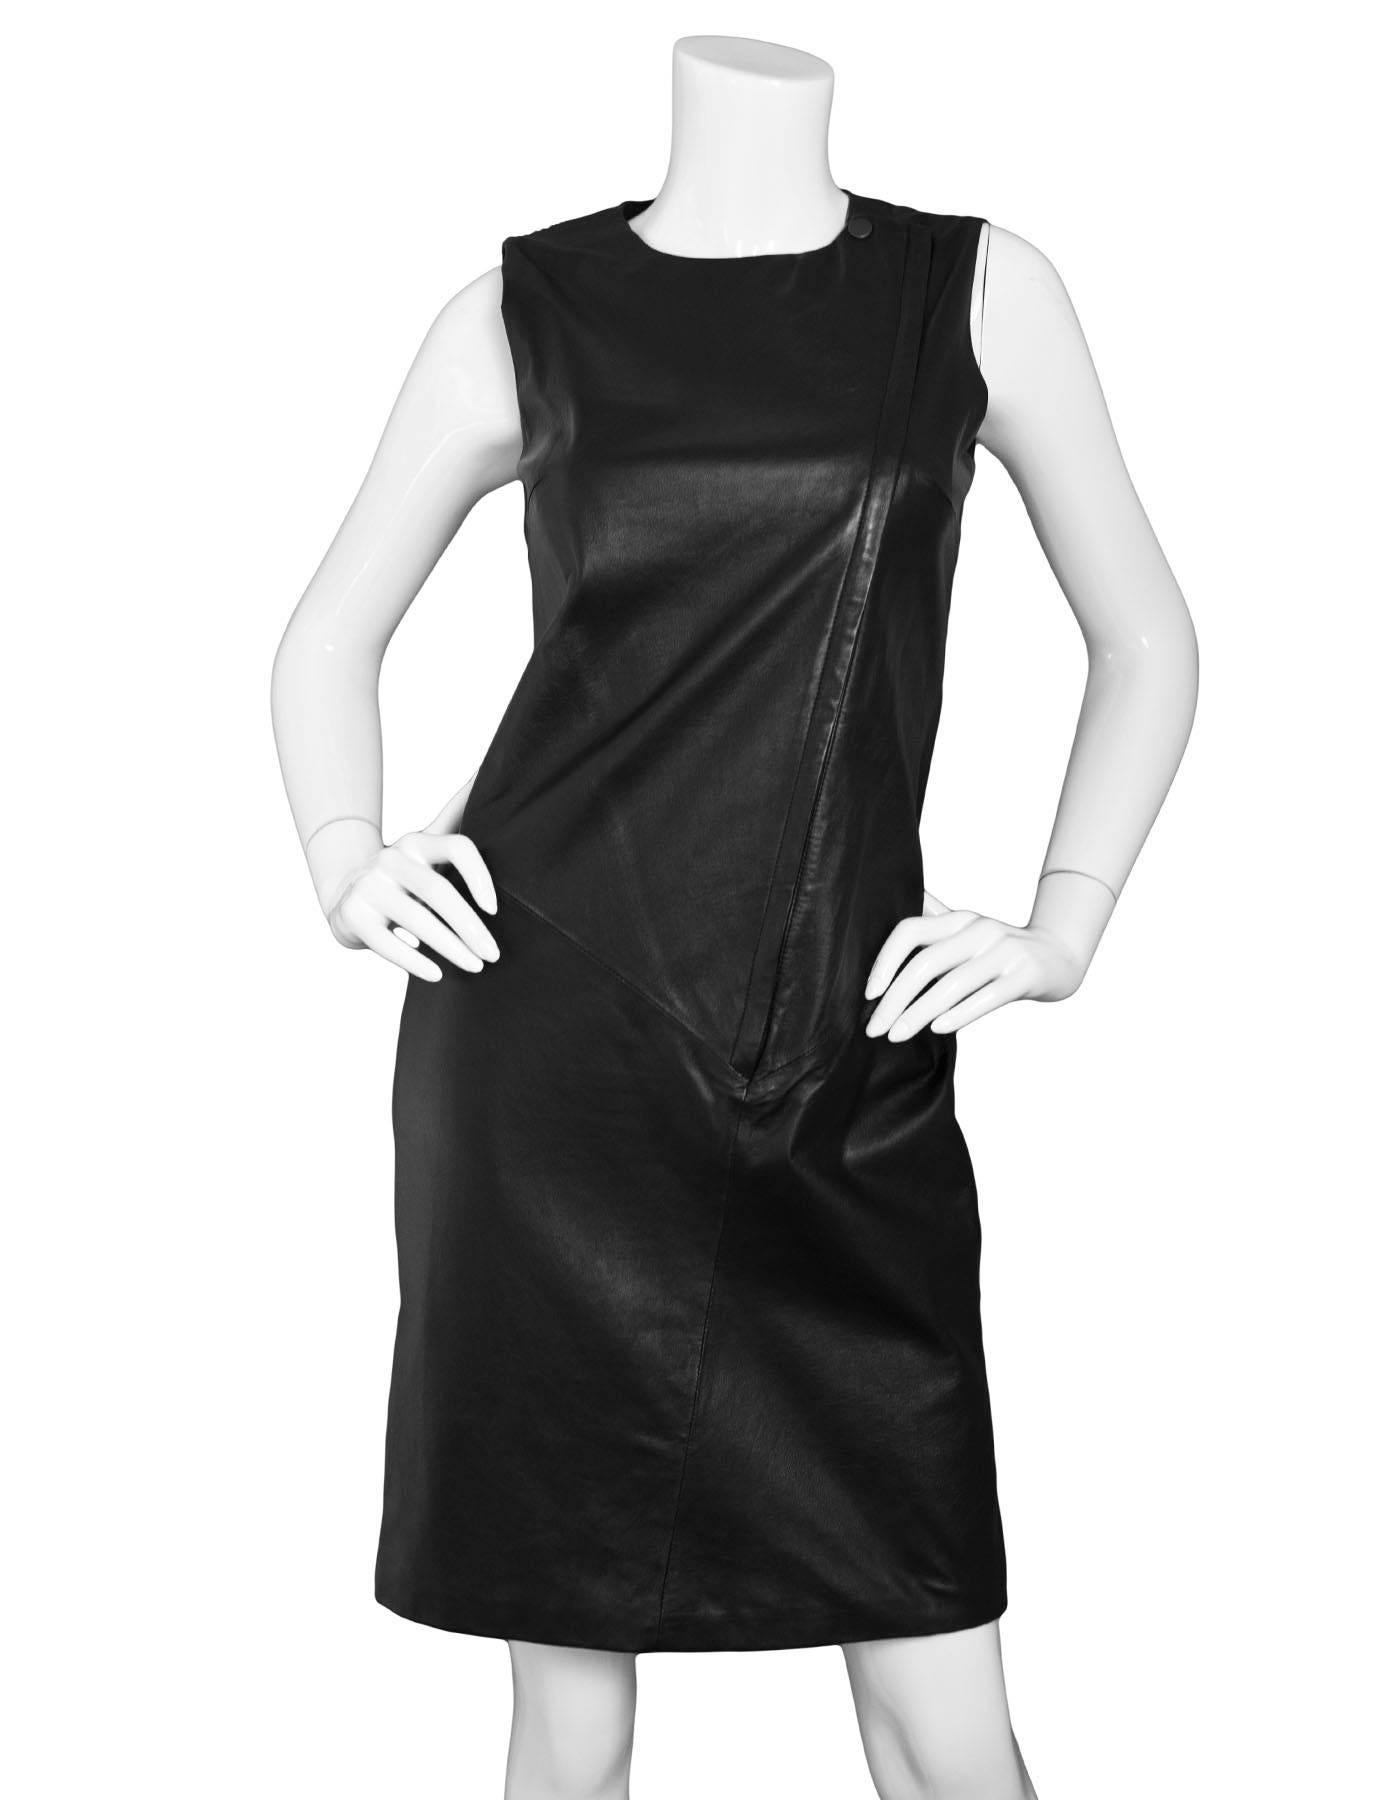 Theory Black Leather Sleeveless Dress Sz 4

Made In: China
Color: Black
Composition: 100% Lambskin
Lining: Black textile
Closure/Opening: Front zip closure
Overall Condition: Excellent pre-owned condition
Marked Size: 4
Bust: 31"
Waist: